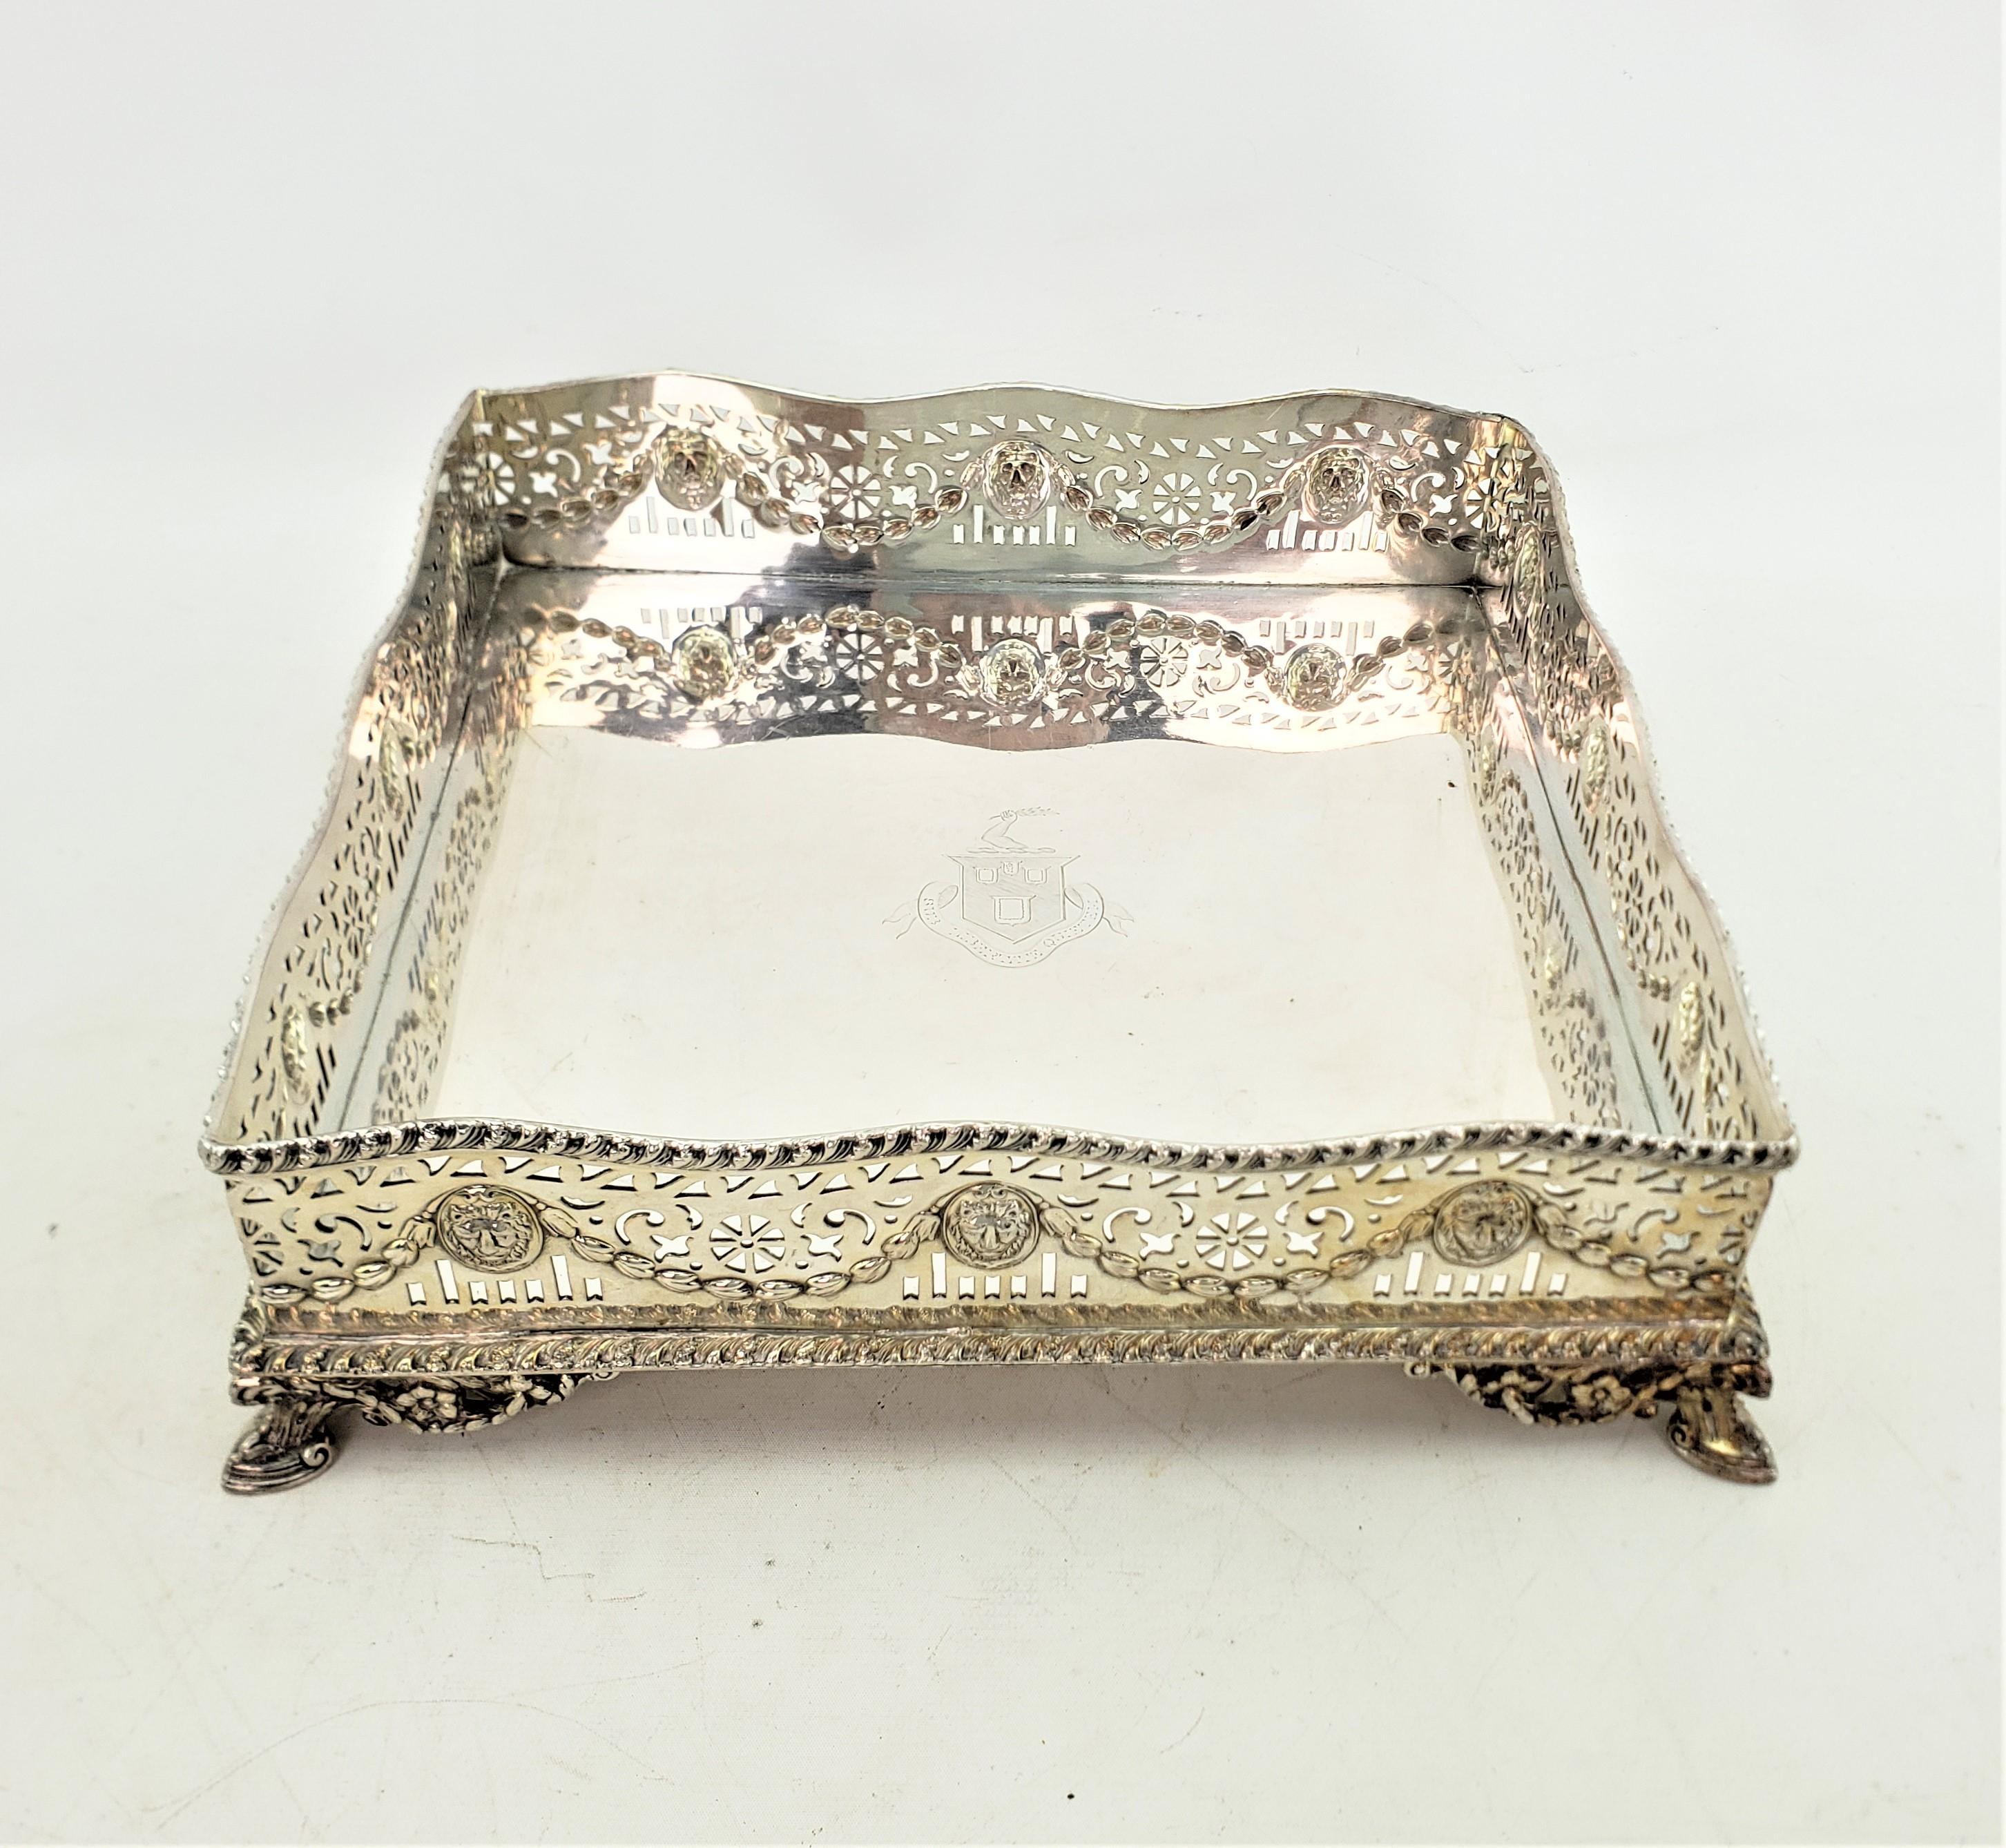 This antique gallery serving or bar tray was made by the renowned Barker-Ellis company of England in approximately 1920 in a Victorian style. The tray is composed of silver plate and done in a unique square shape with a high pierced gallery with a